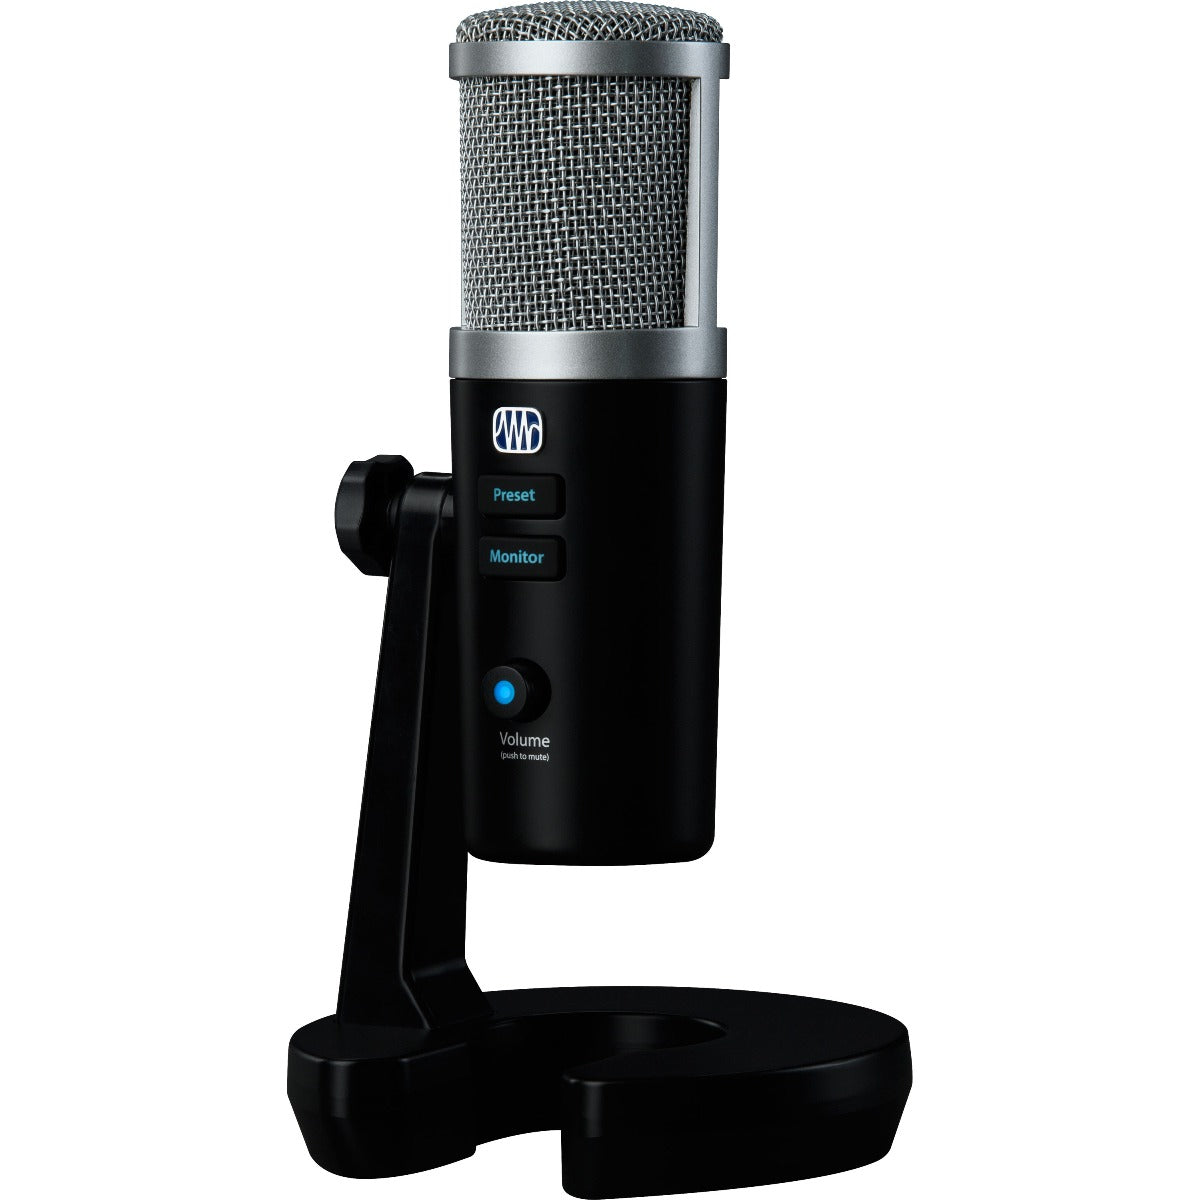 Image of the microphone from a quarter angle perspective